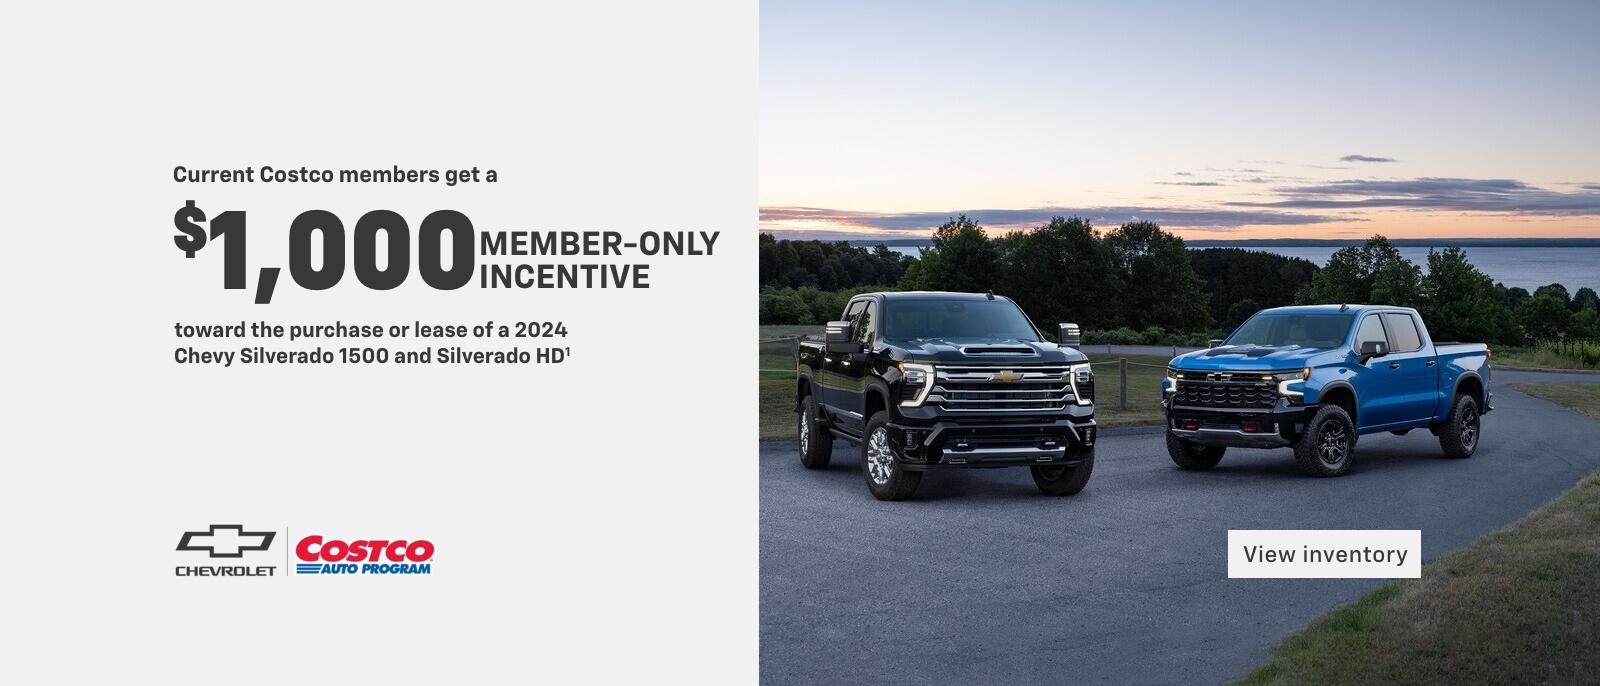 Current Costco members get a $1,000 member-only incentive toward the purchase or lease of a 2024 Chevy Silverado 1500 and Silverado HD.